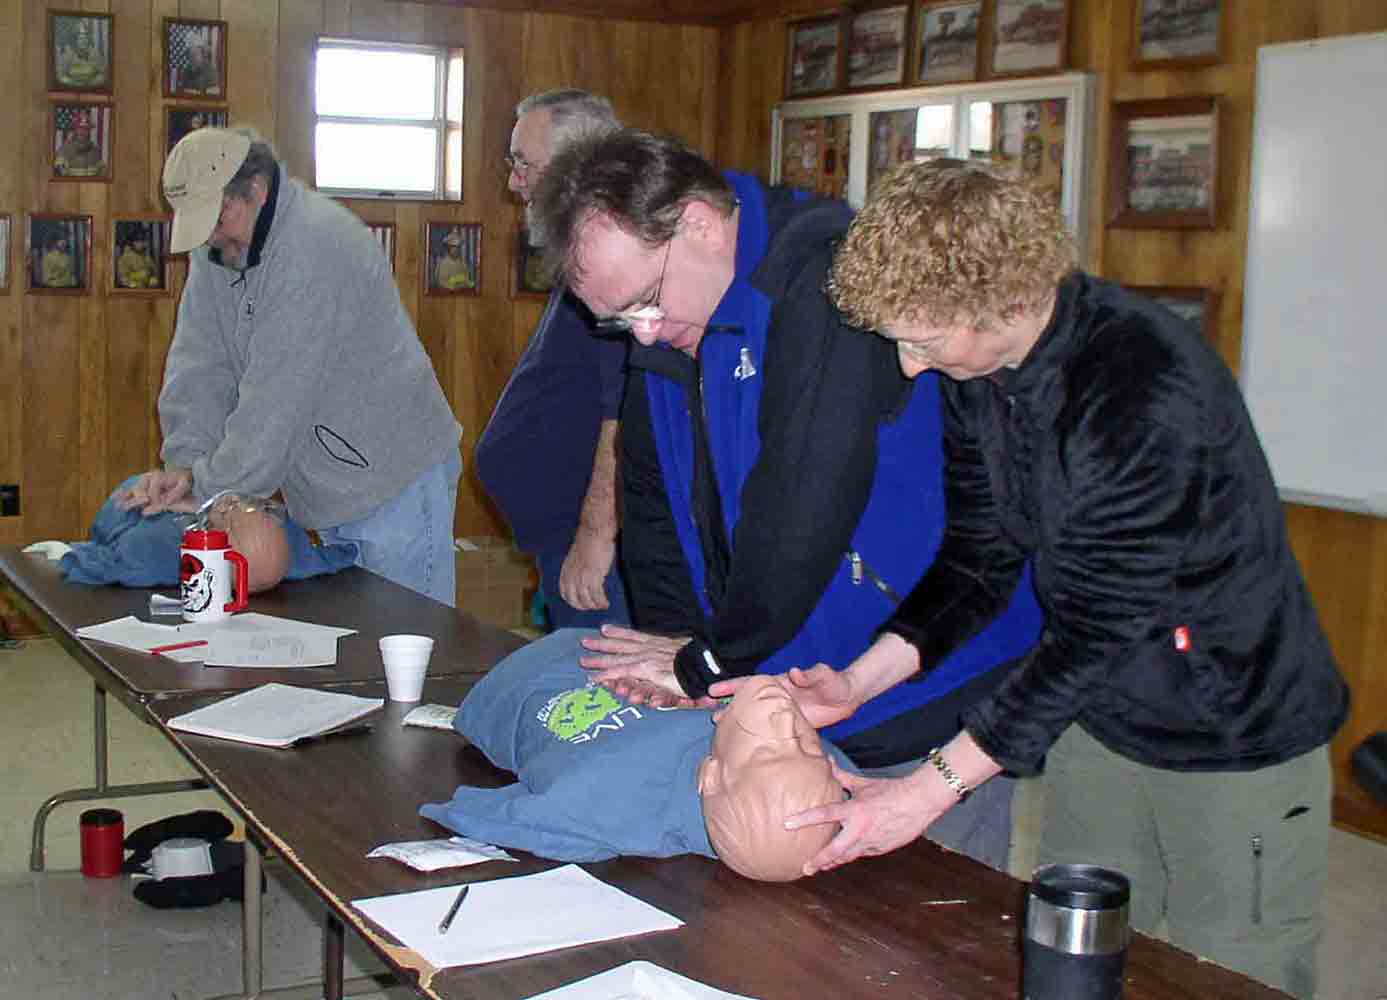 Auxiliarists practicing CPR